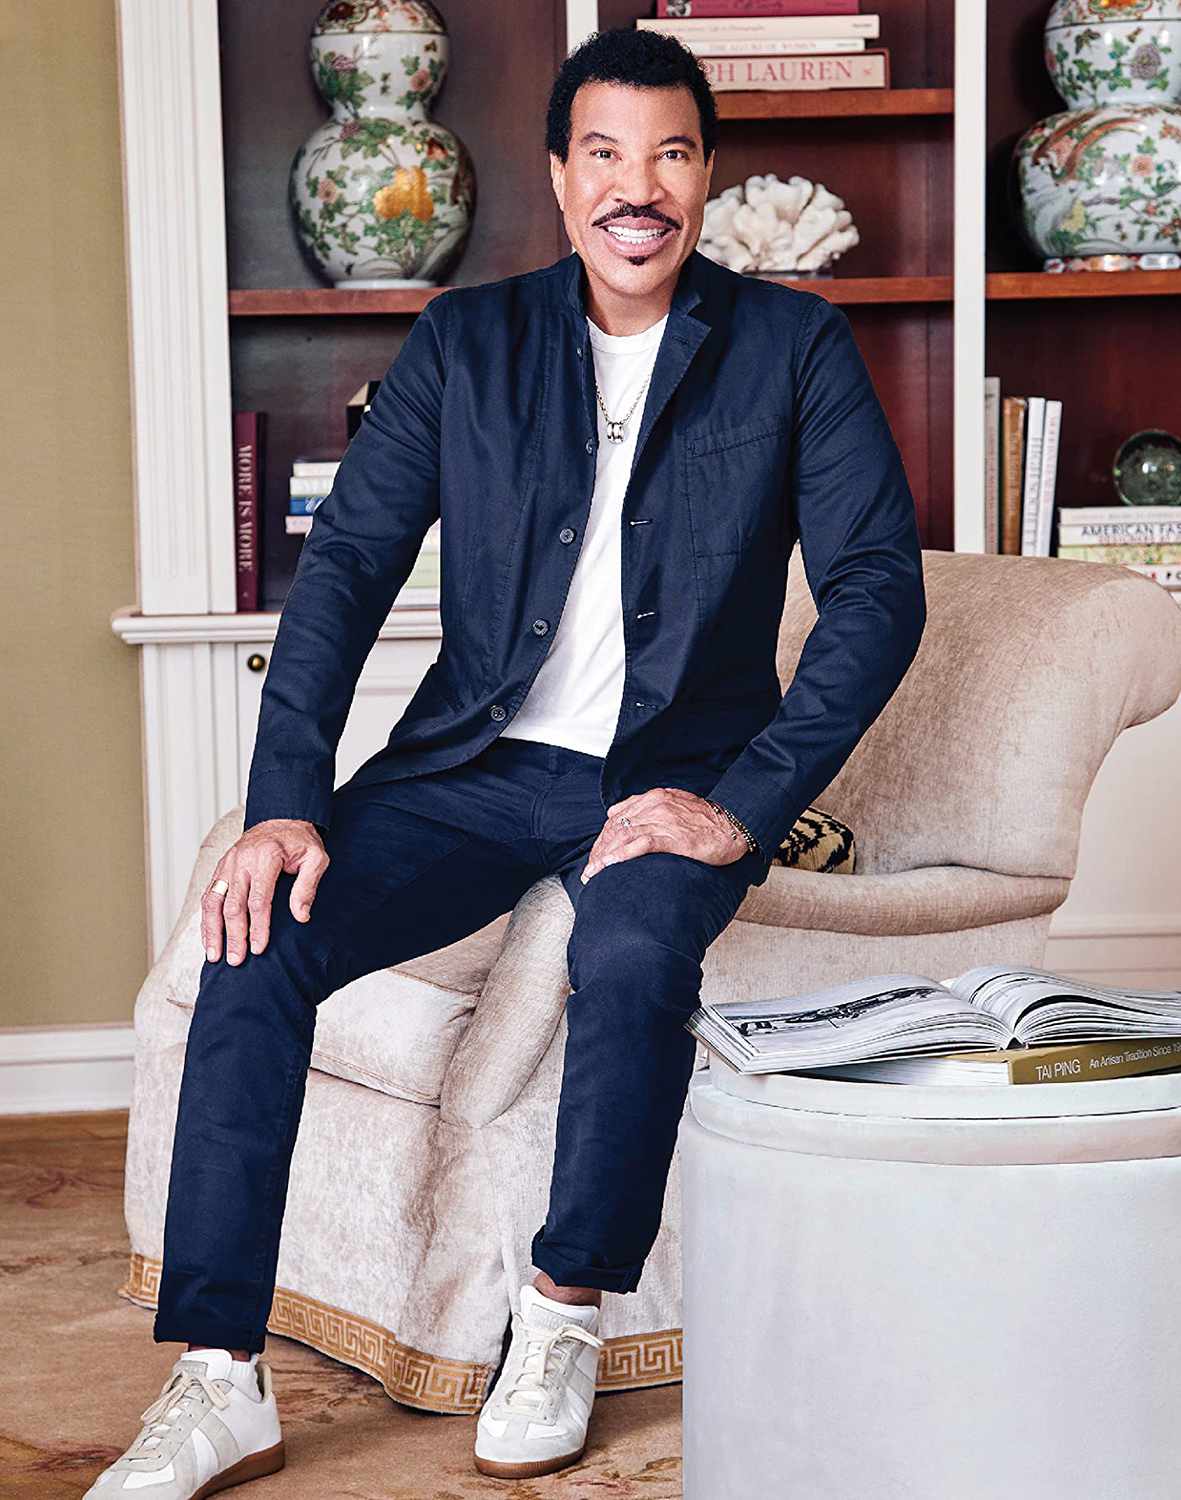 Lionel Richie x The FHE Group